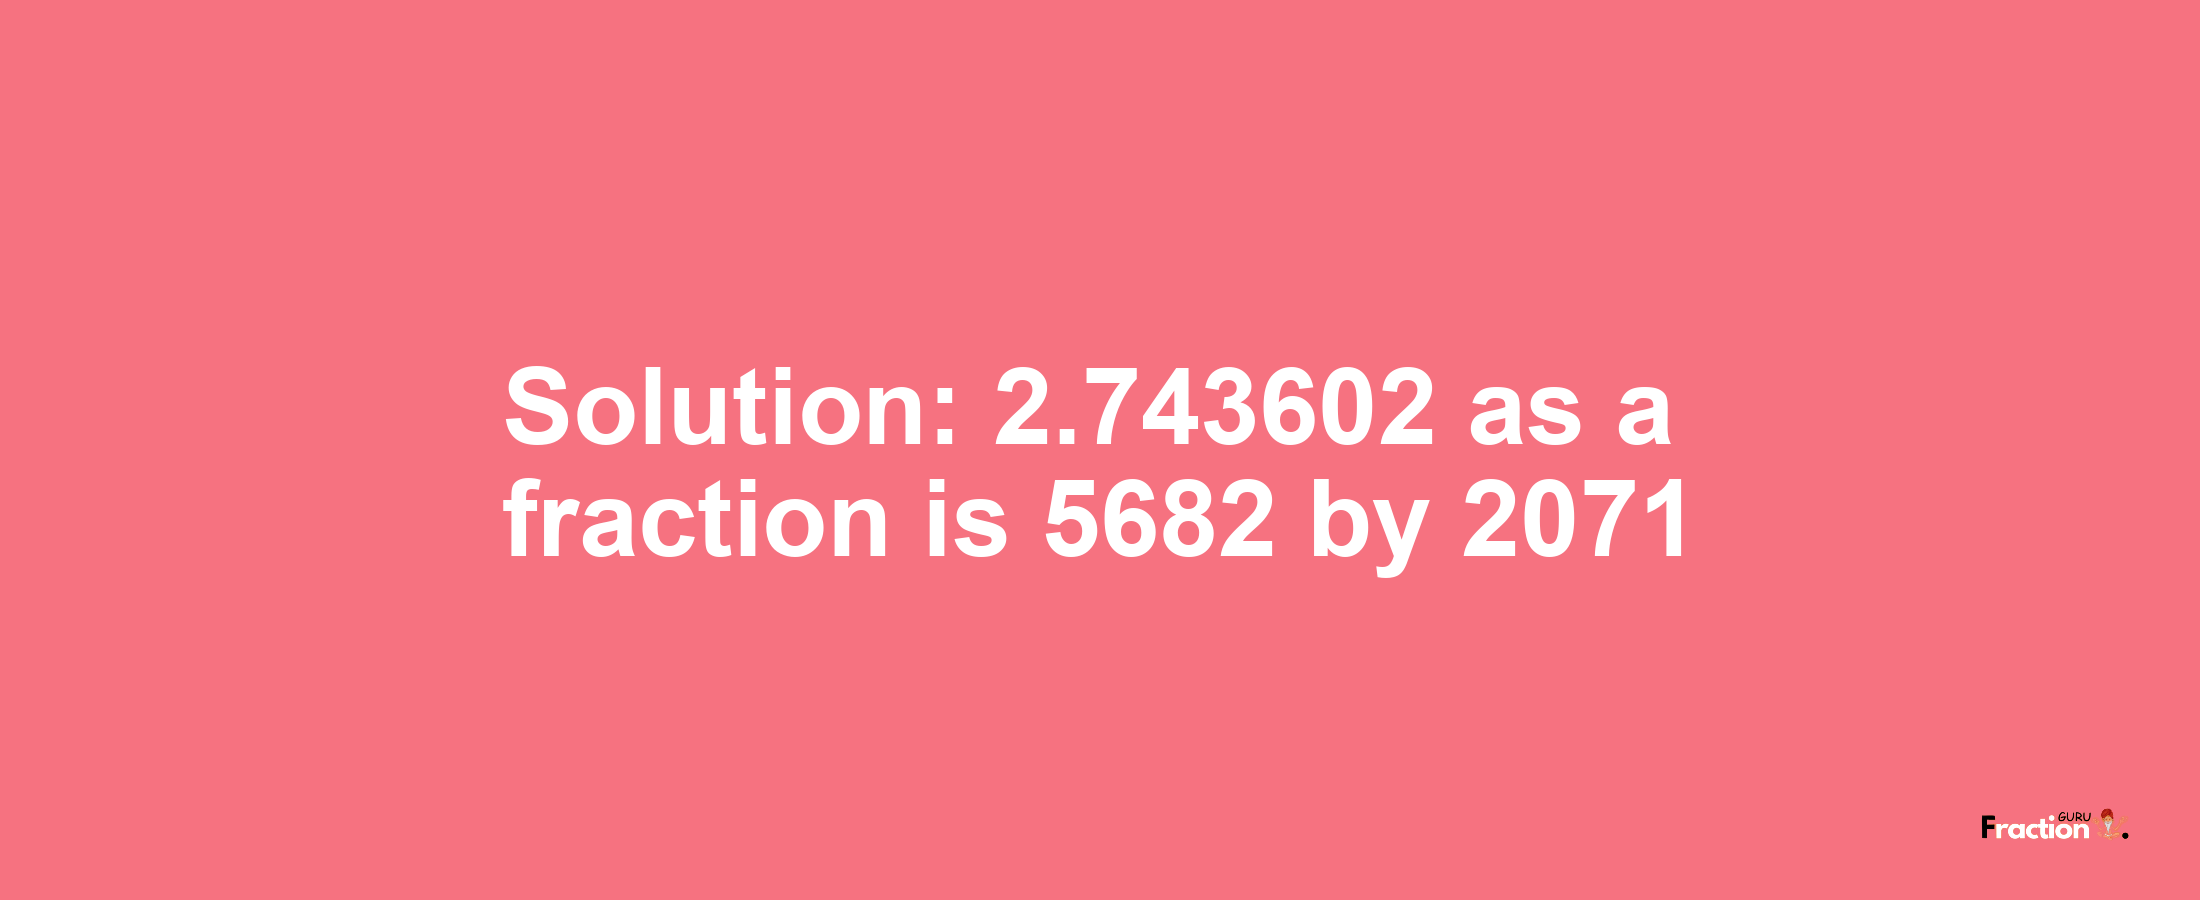 Solution:2.743602 as a fraction is 5682/2071